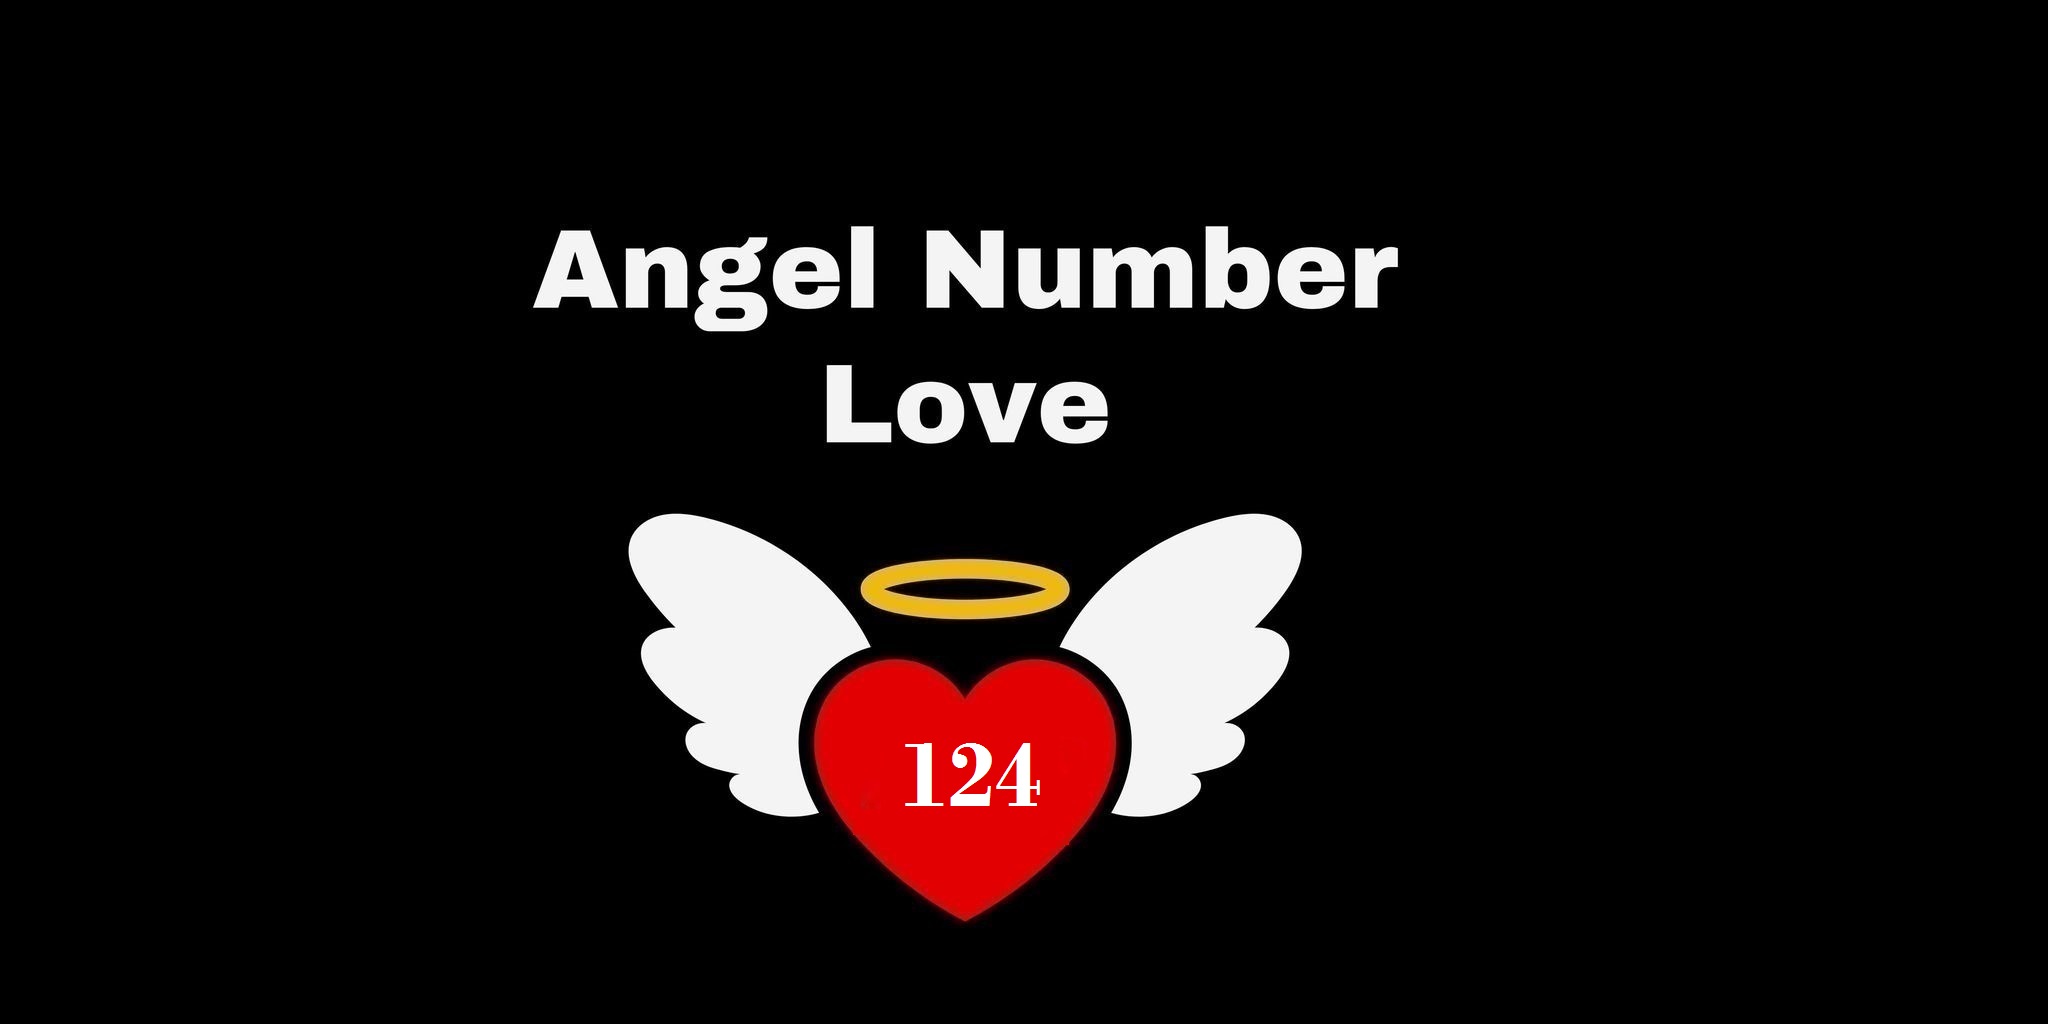 124 Angel Number Meaning In Love